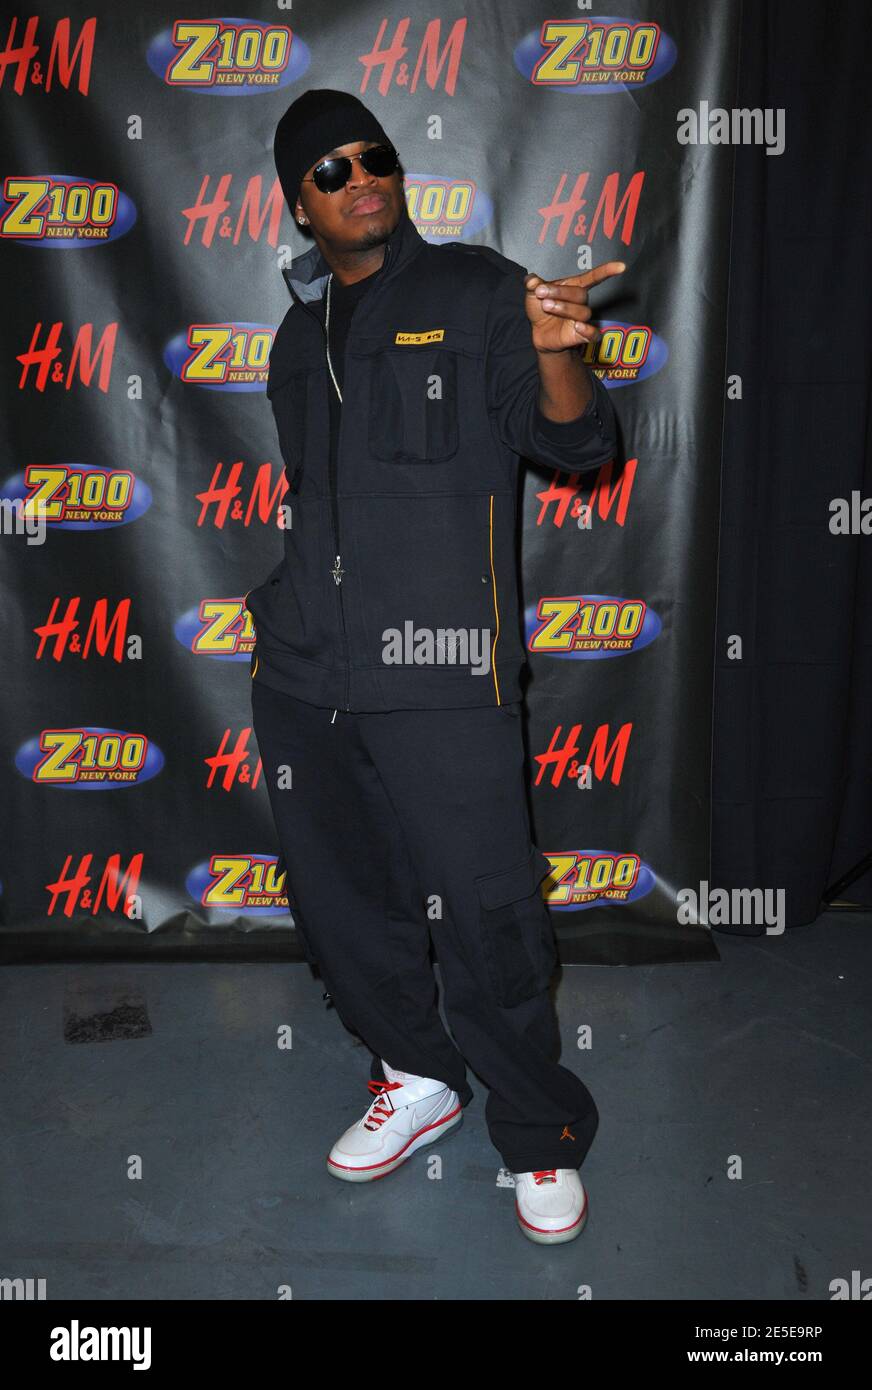 Recording artist Ne-Yo poses in the press room during Z100's Jingle Ball at Madison Square Garden in New York City, USA on December 12, 2008. Photo by Gregorio Binuya/ABACAUSA.COM (Pictured : Ne-Yo) Stock Photo